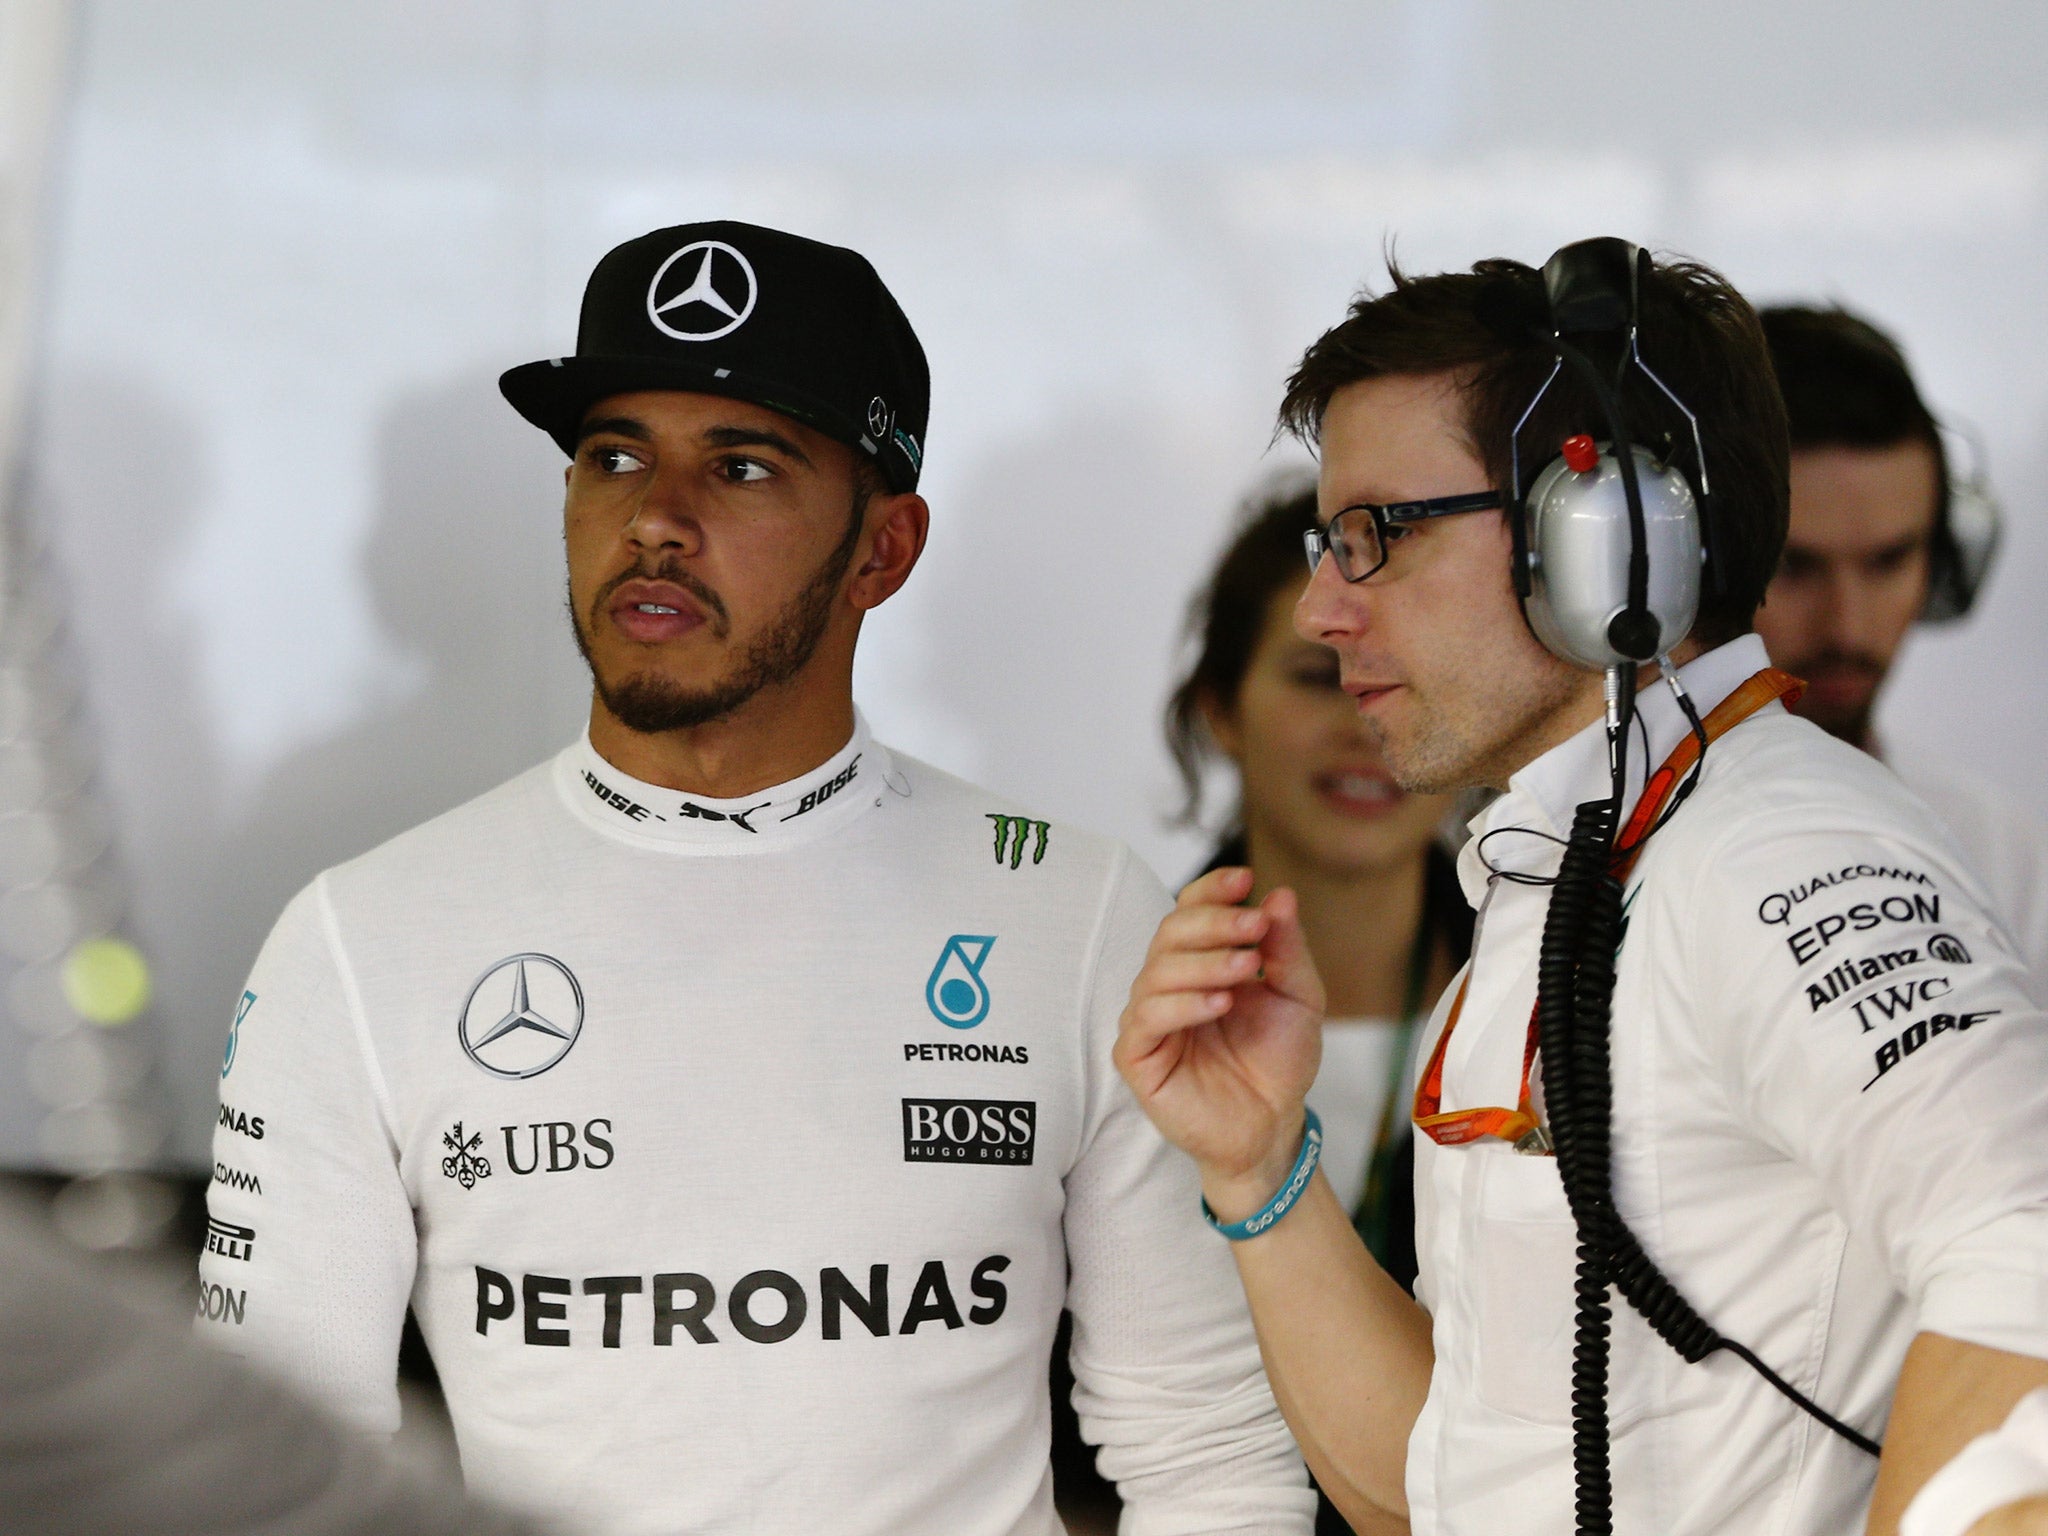 Lewis Hamilton will start last after failing to set a lap time in qualifying